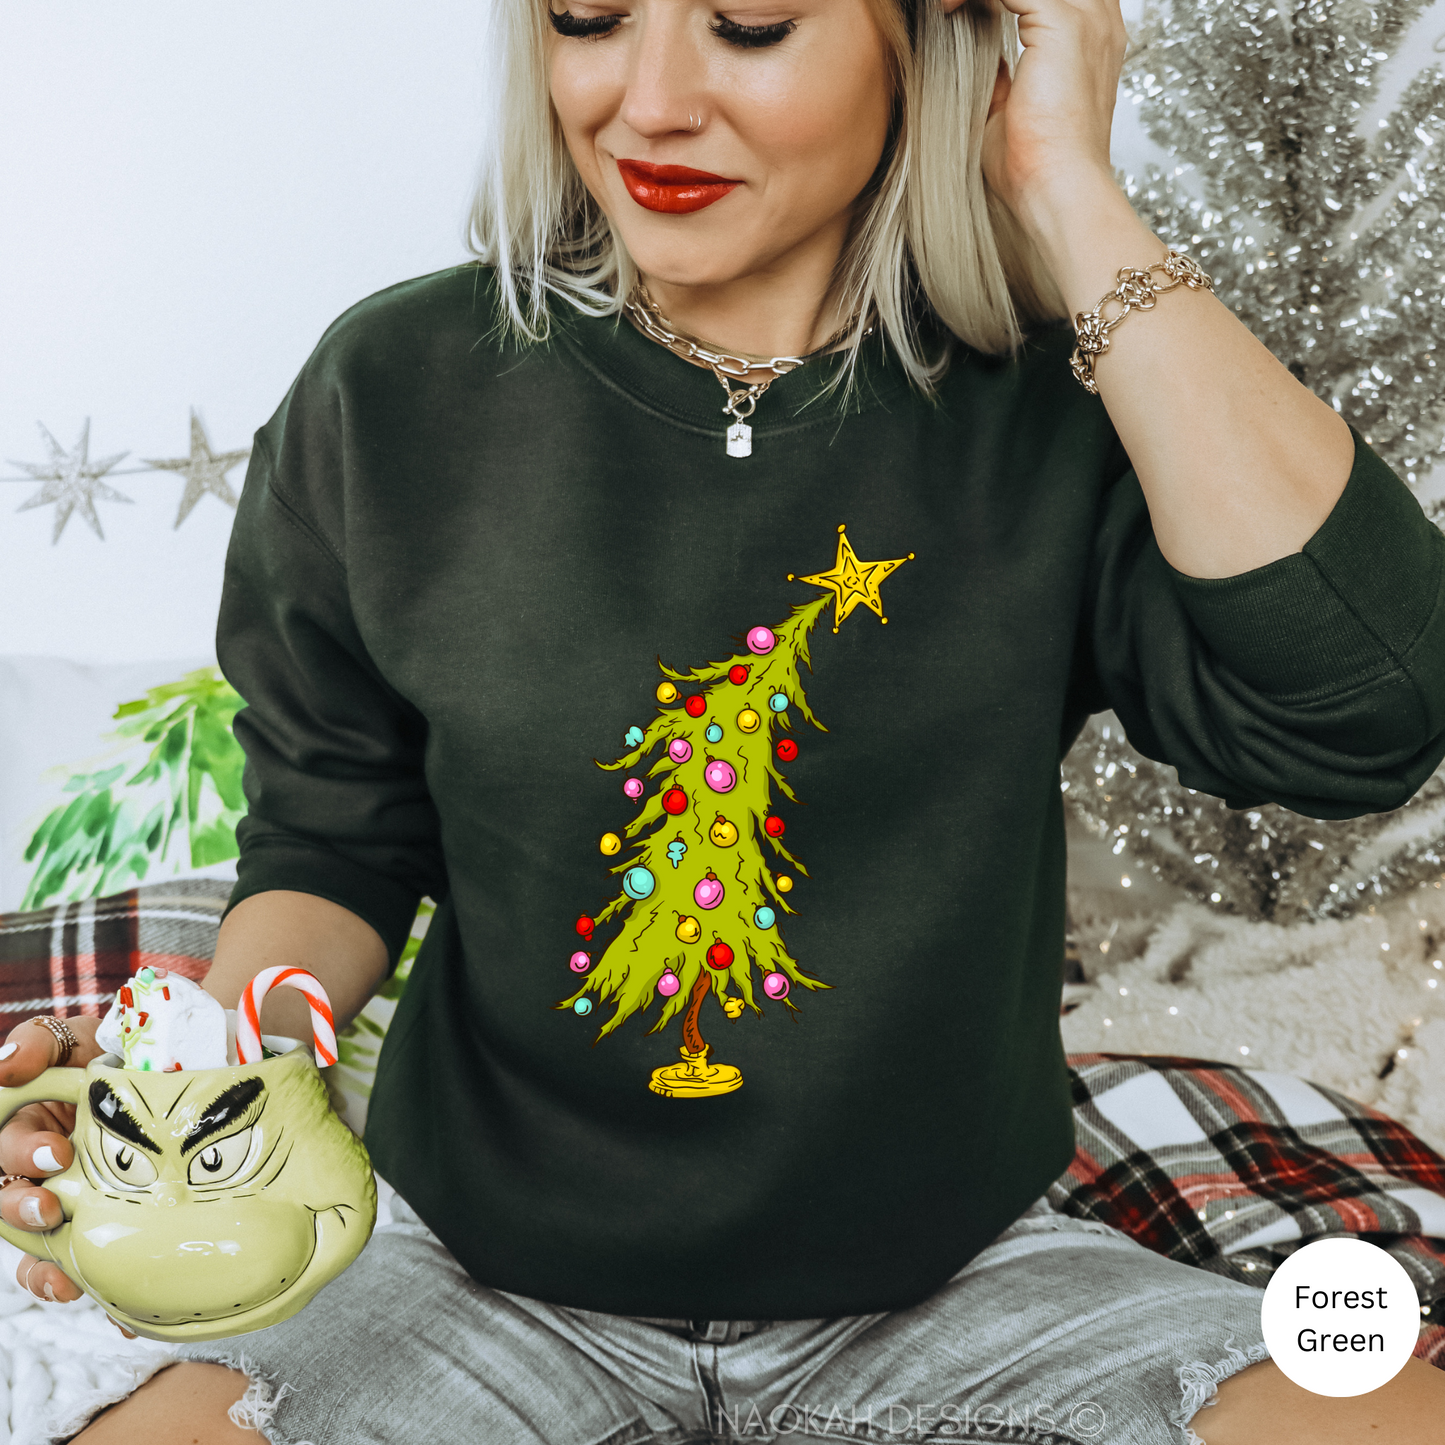 grnch tree sweatshirt, merry christmas sweater, movie christmas characters, trendy christmas lights, merry and bright sweater